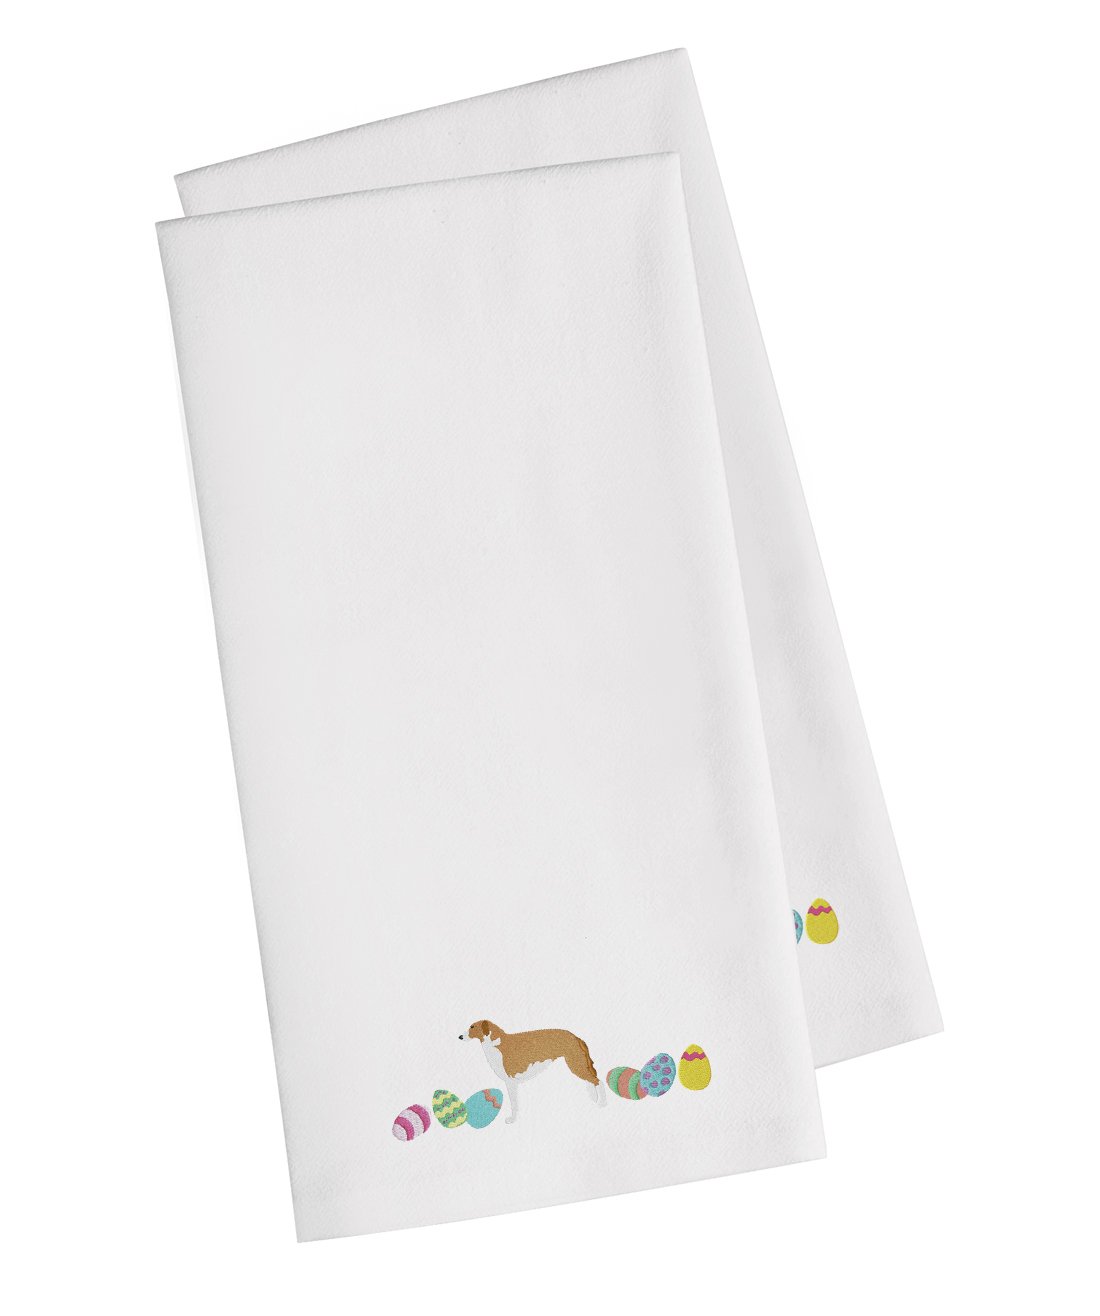 Borzoi Easter White Embroidered Kitchen Towel Set of 2 CK1679WHTWE by Caroline's Treasures